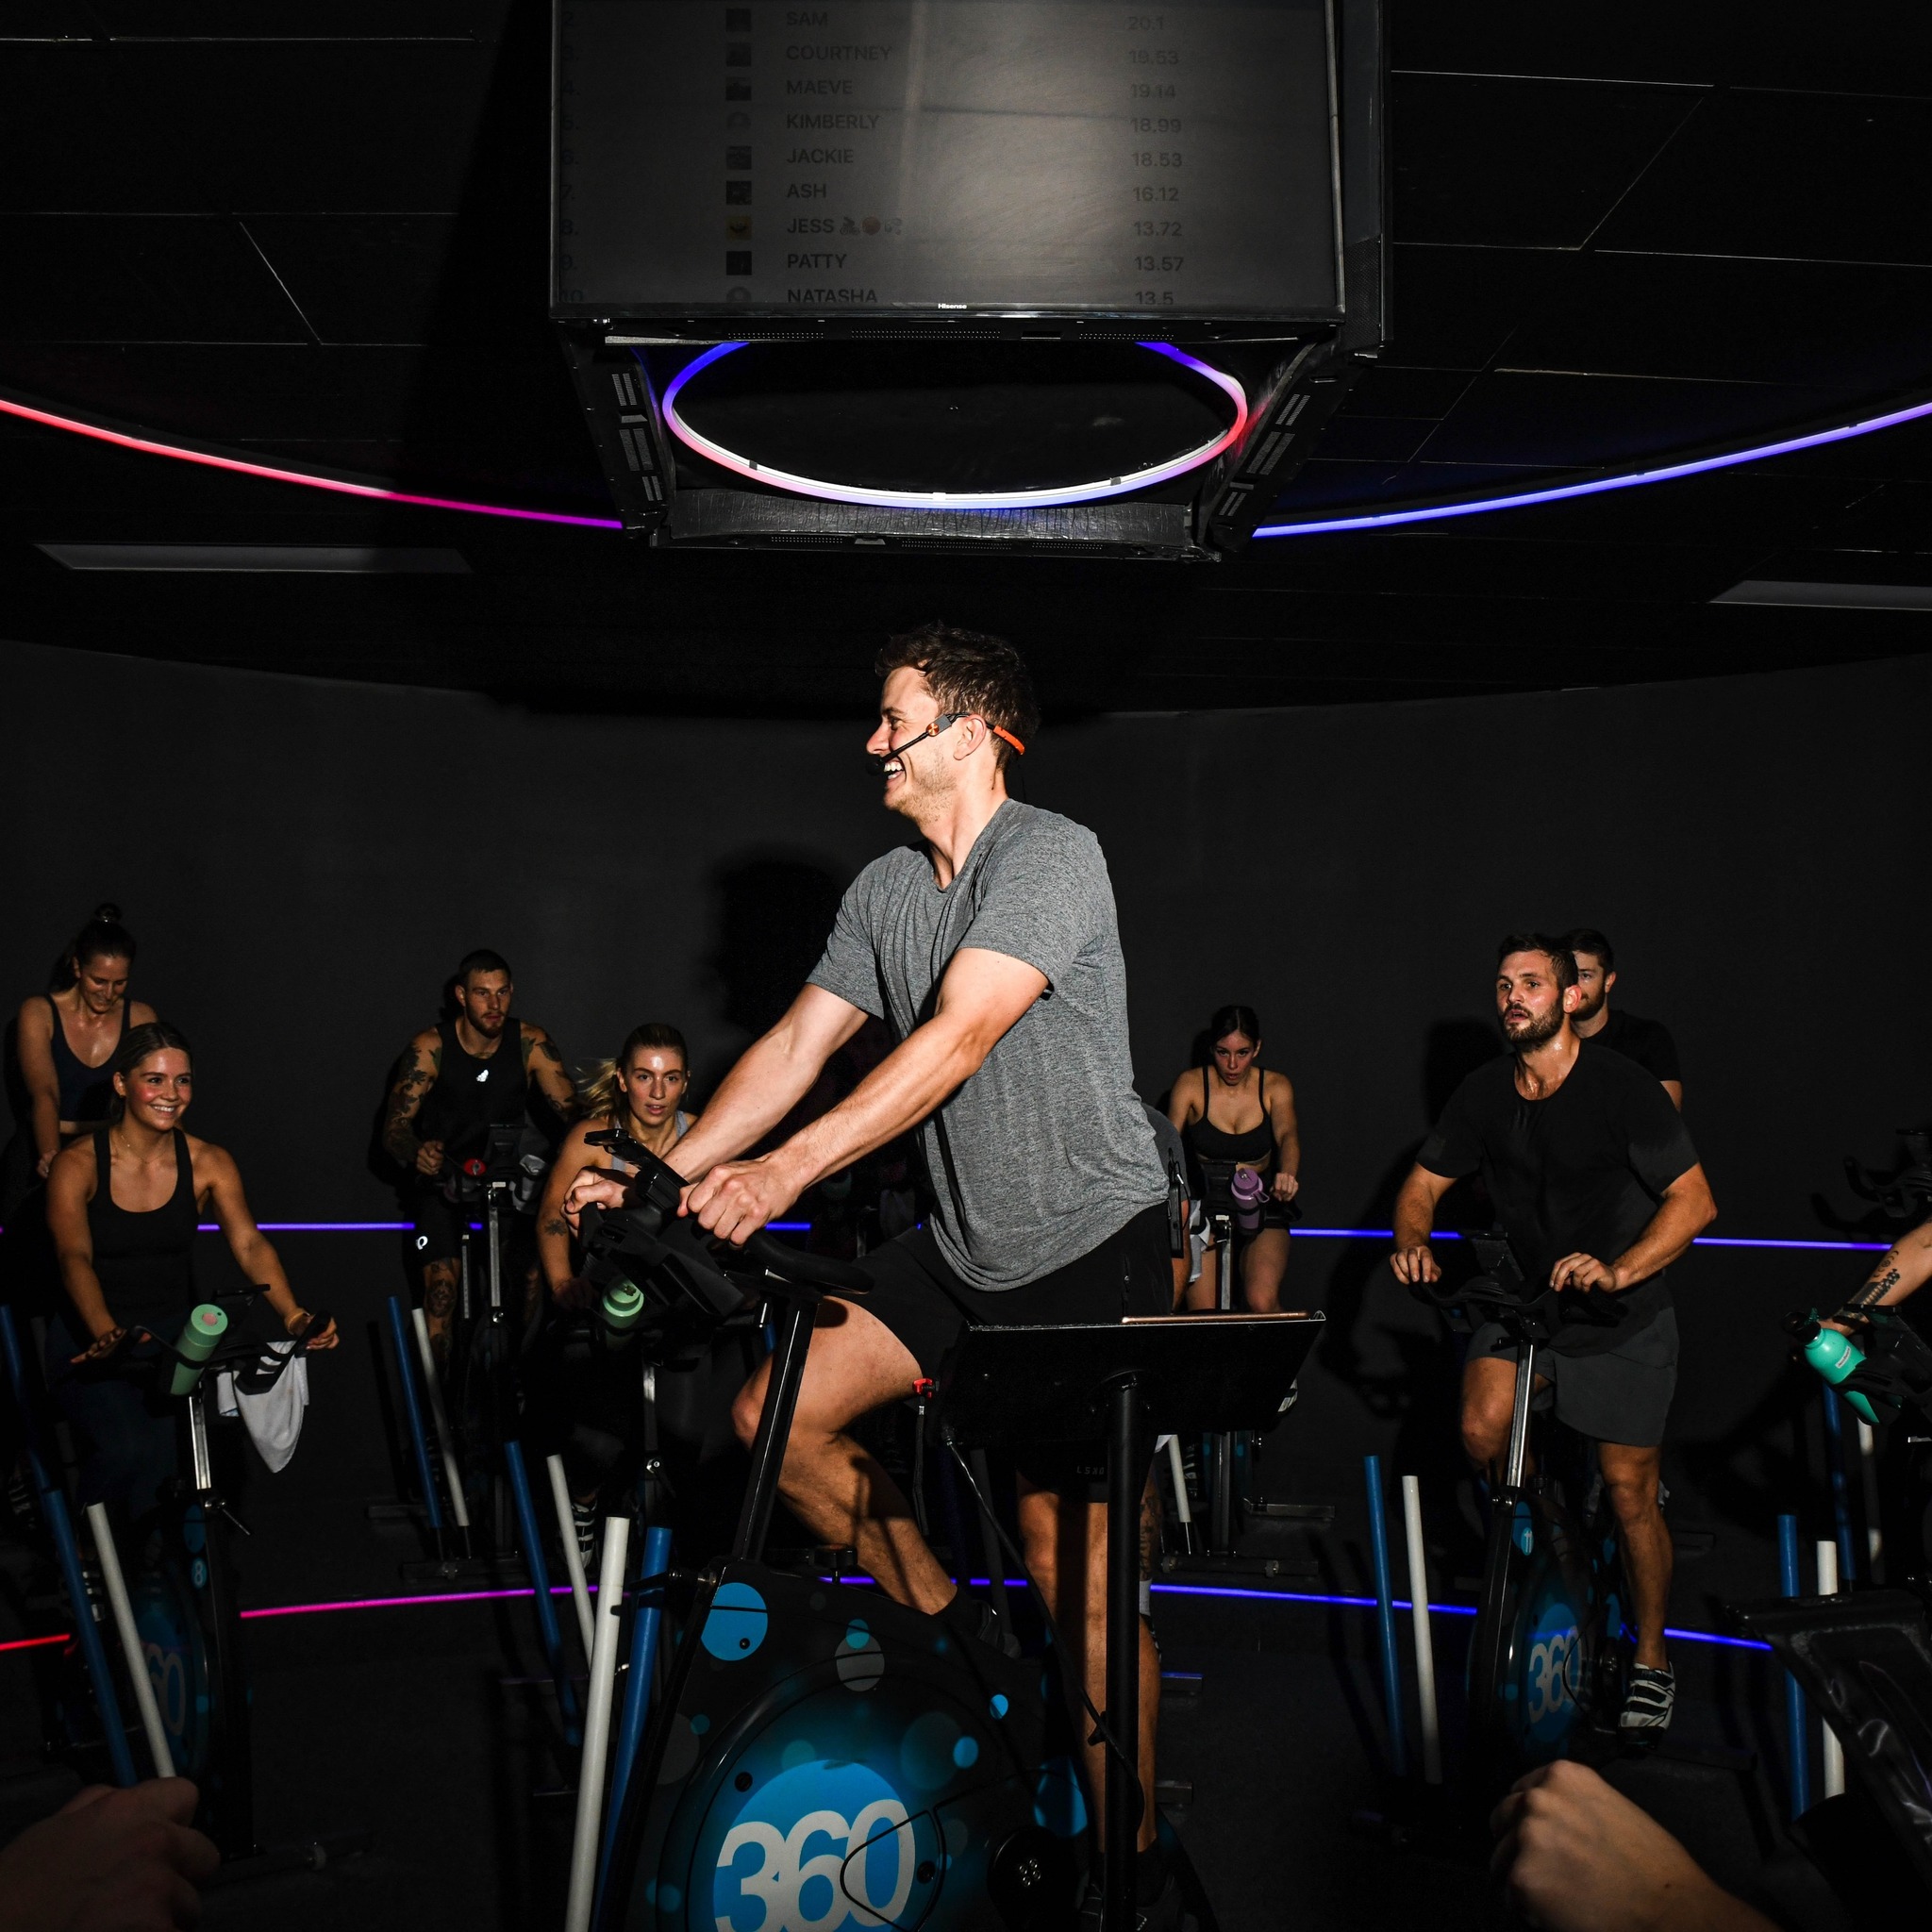 Man and others on stationary bikes at a spin class